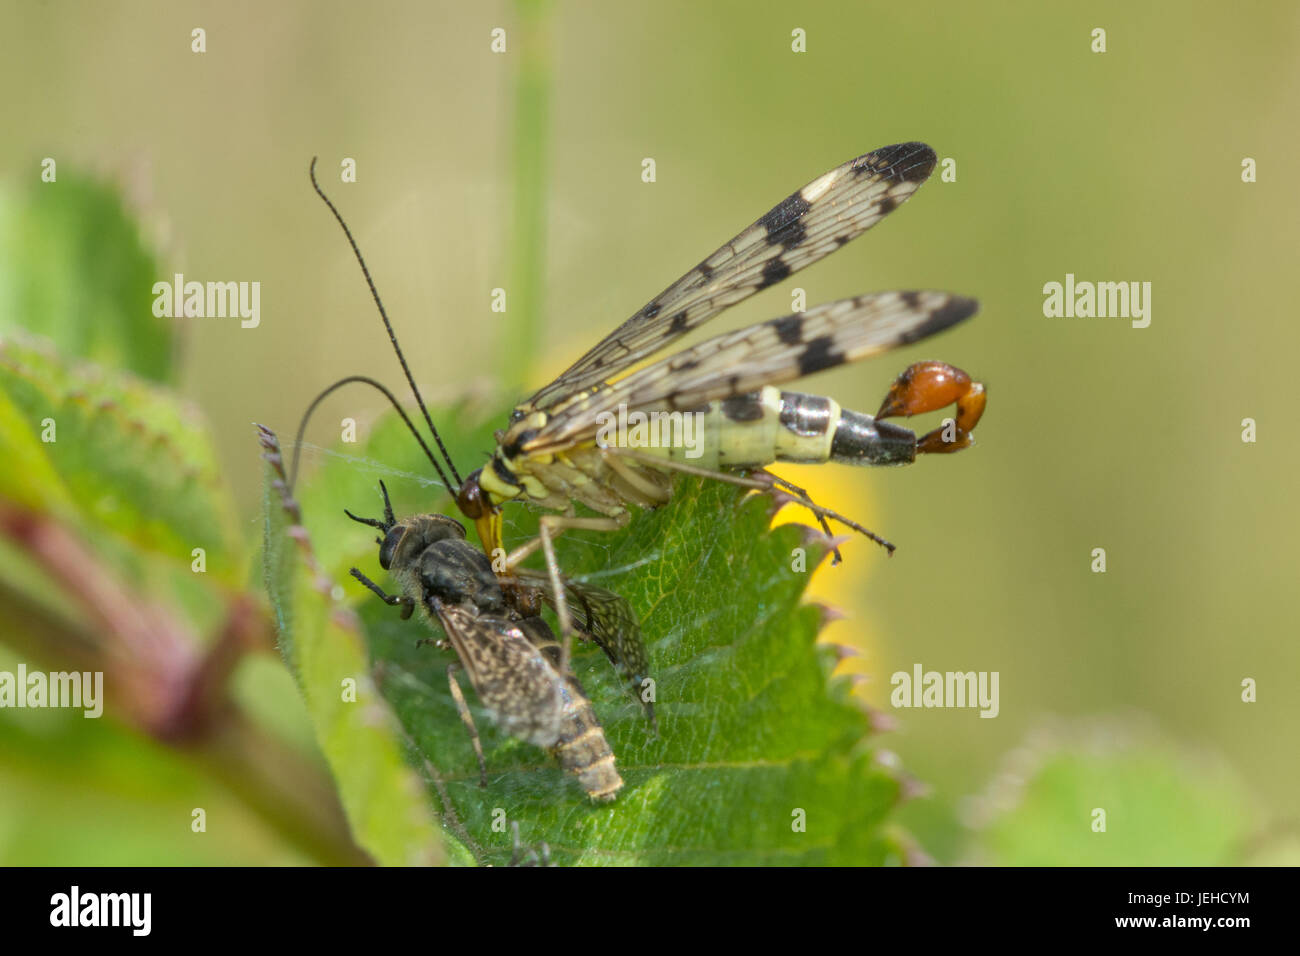 Close-up of a scorpion fly (Panorpa species) feeding on a dead fly Stock Photo